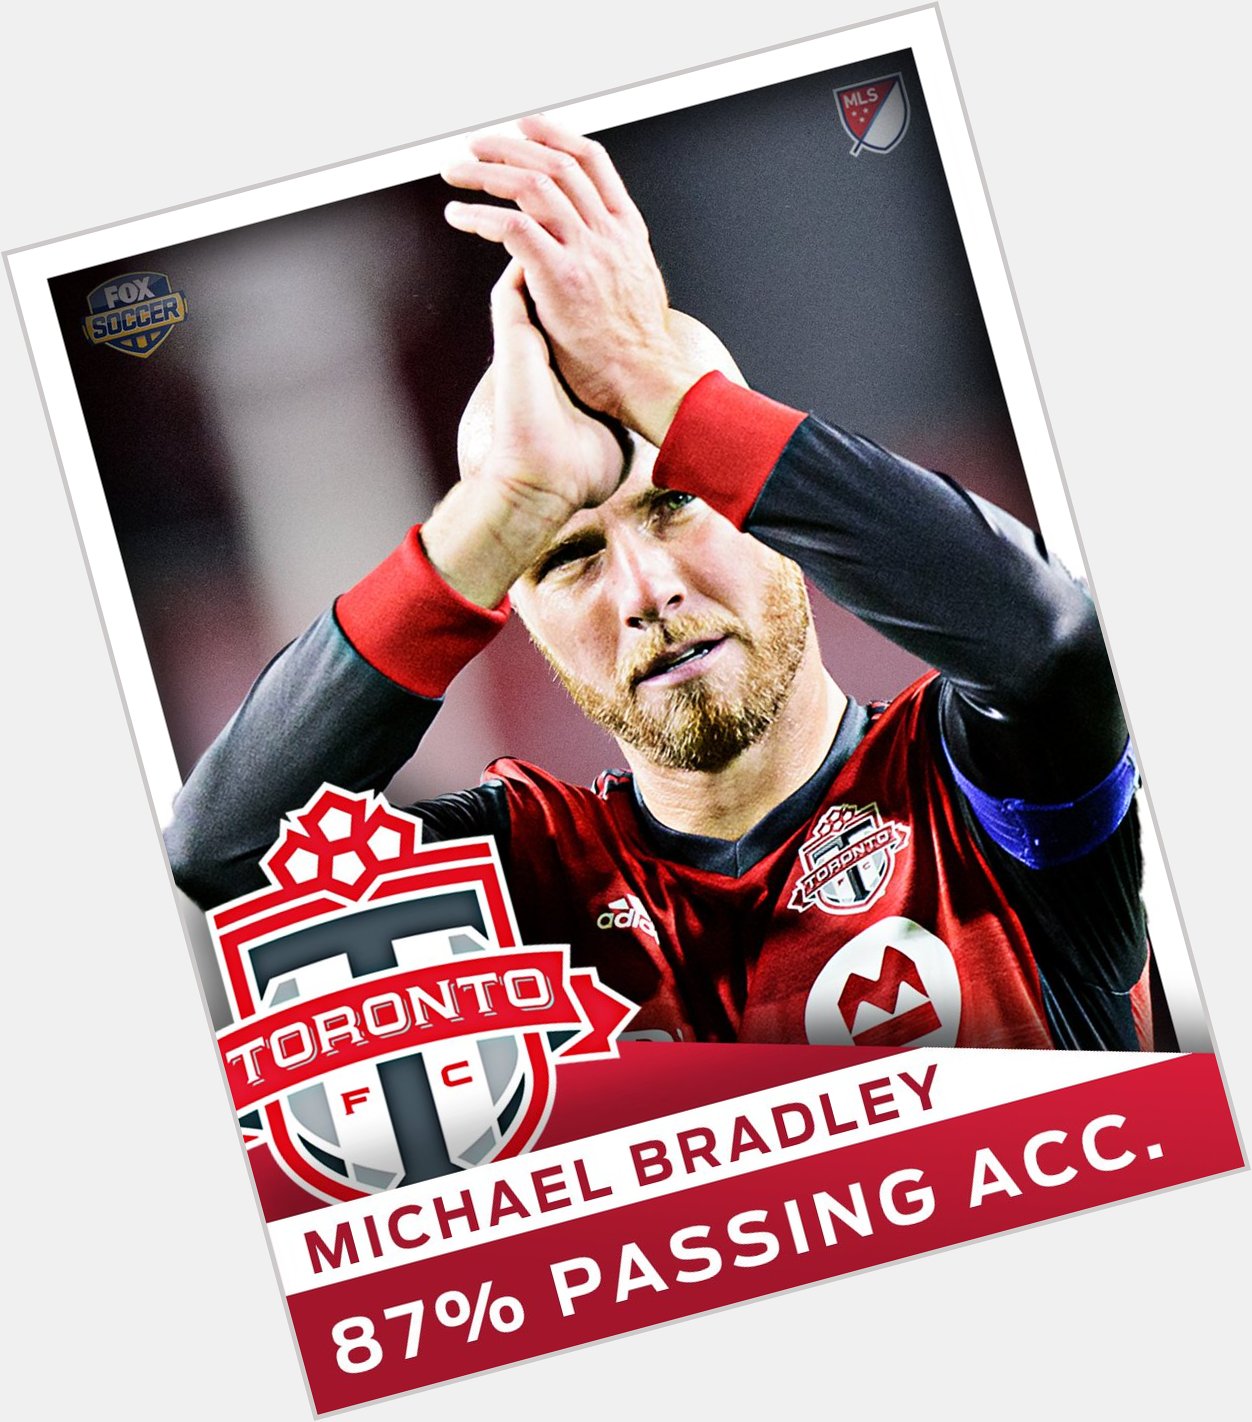 Happy 30th birthday Michael Bradley!

Watch him in action at the Game vs Real Madrid, Wednesday on 